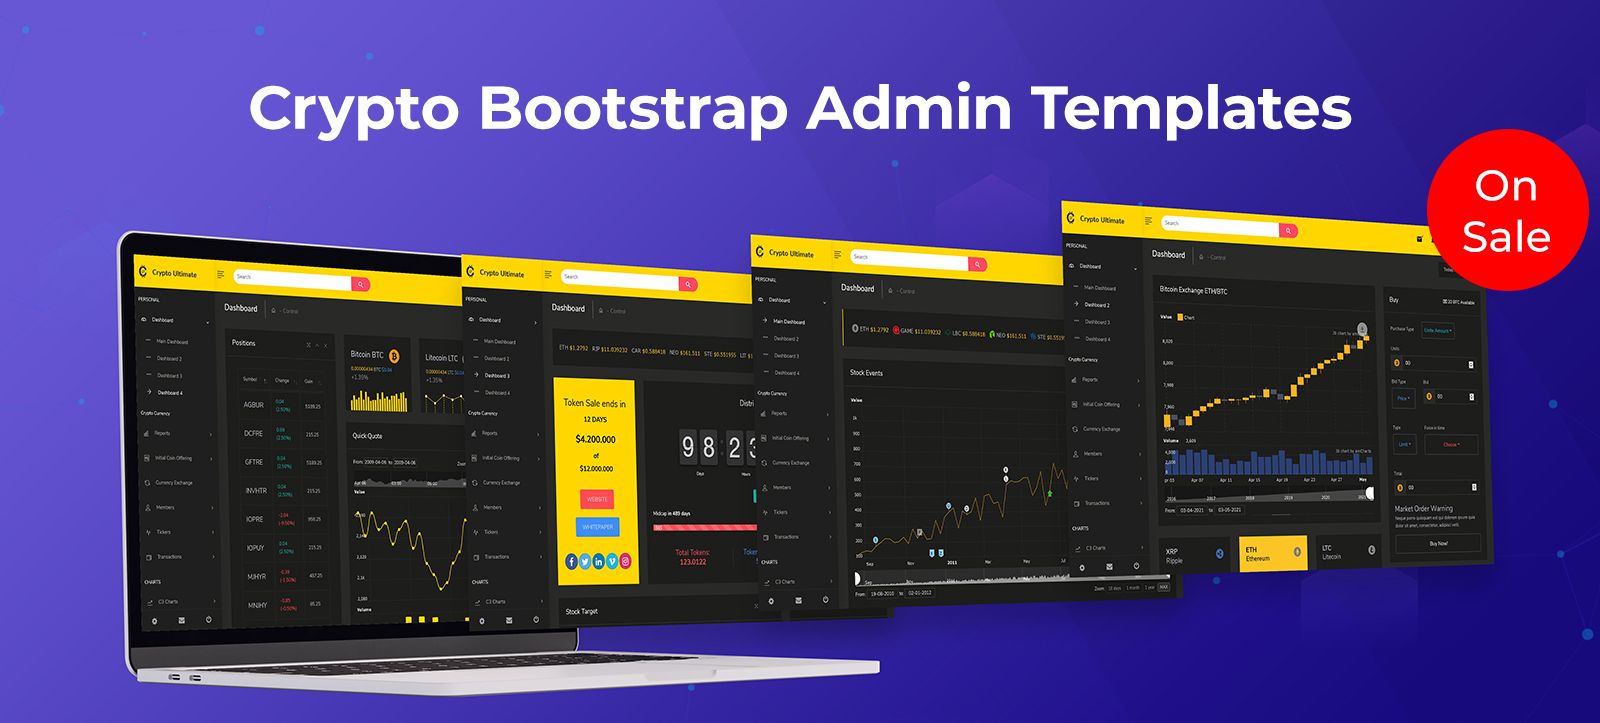 Bootstrap Crypto Admin Templates For CryptoCurrency Website